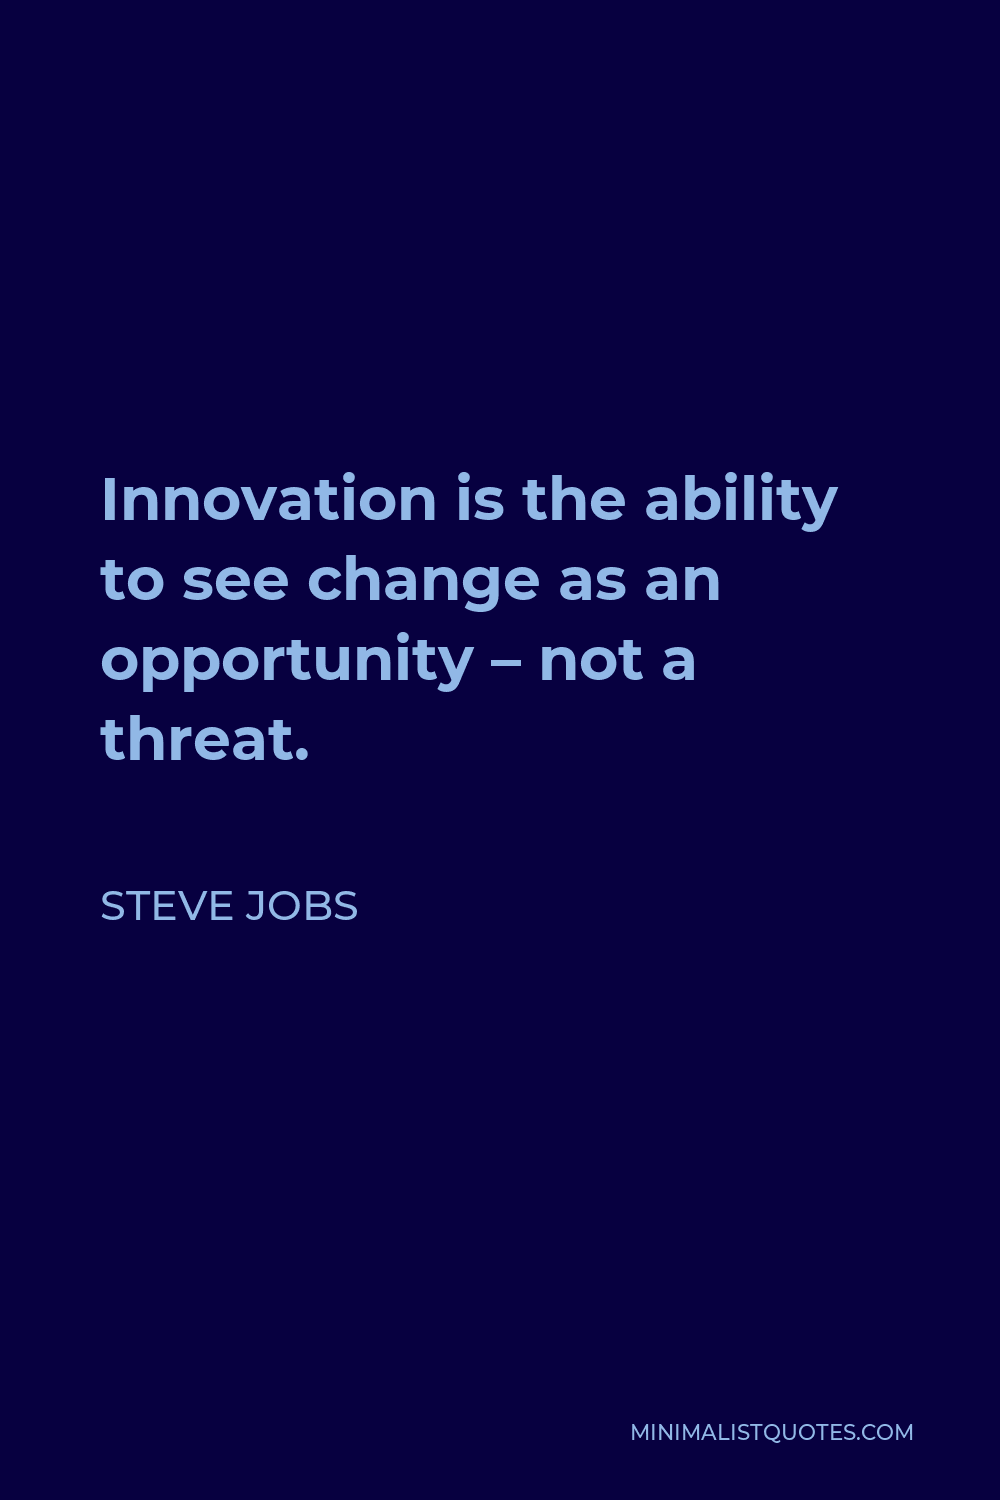 Steve Jobs Quote - Innovation is the ability to see change as an opportunity – not a threat.